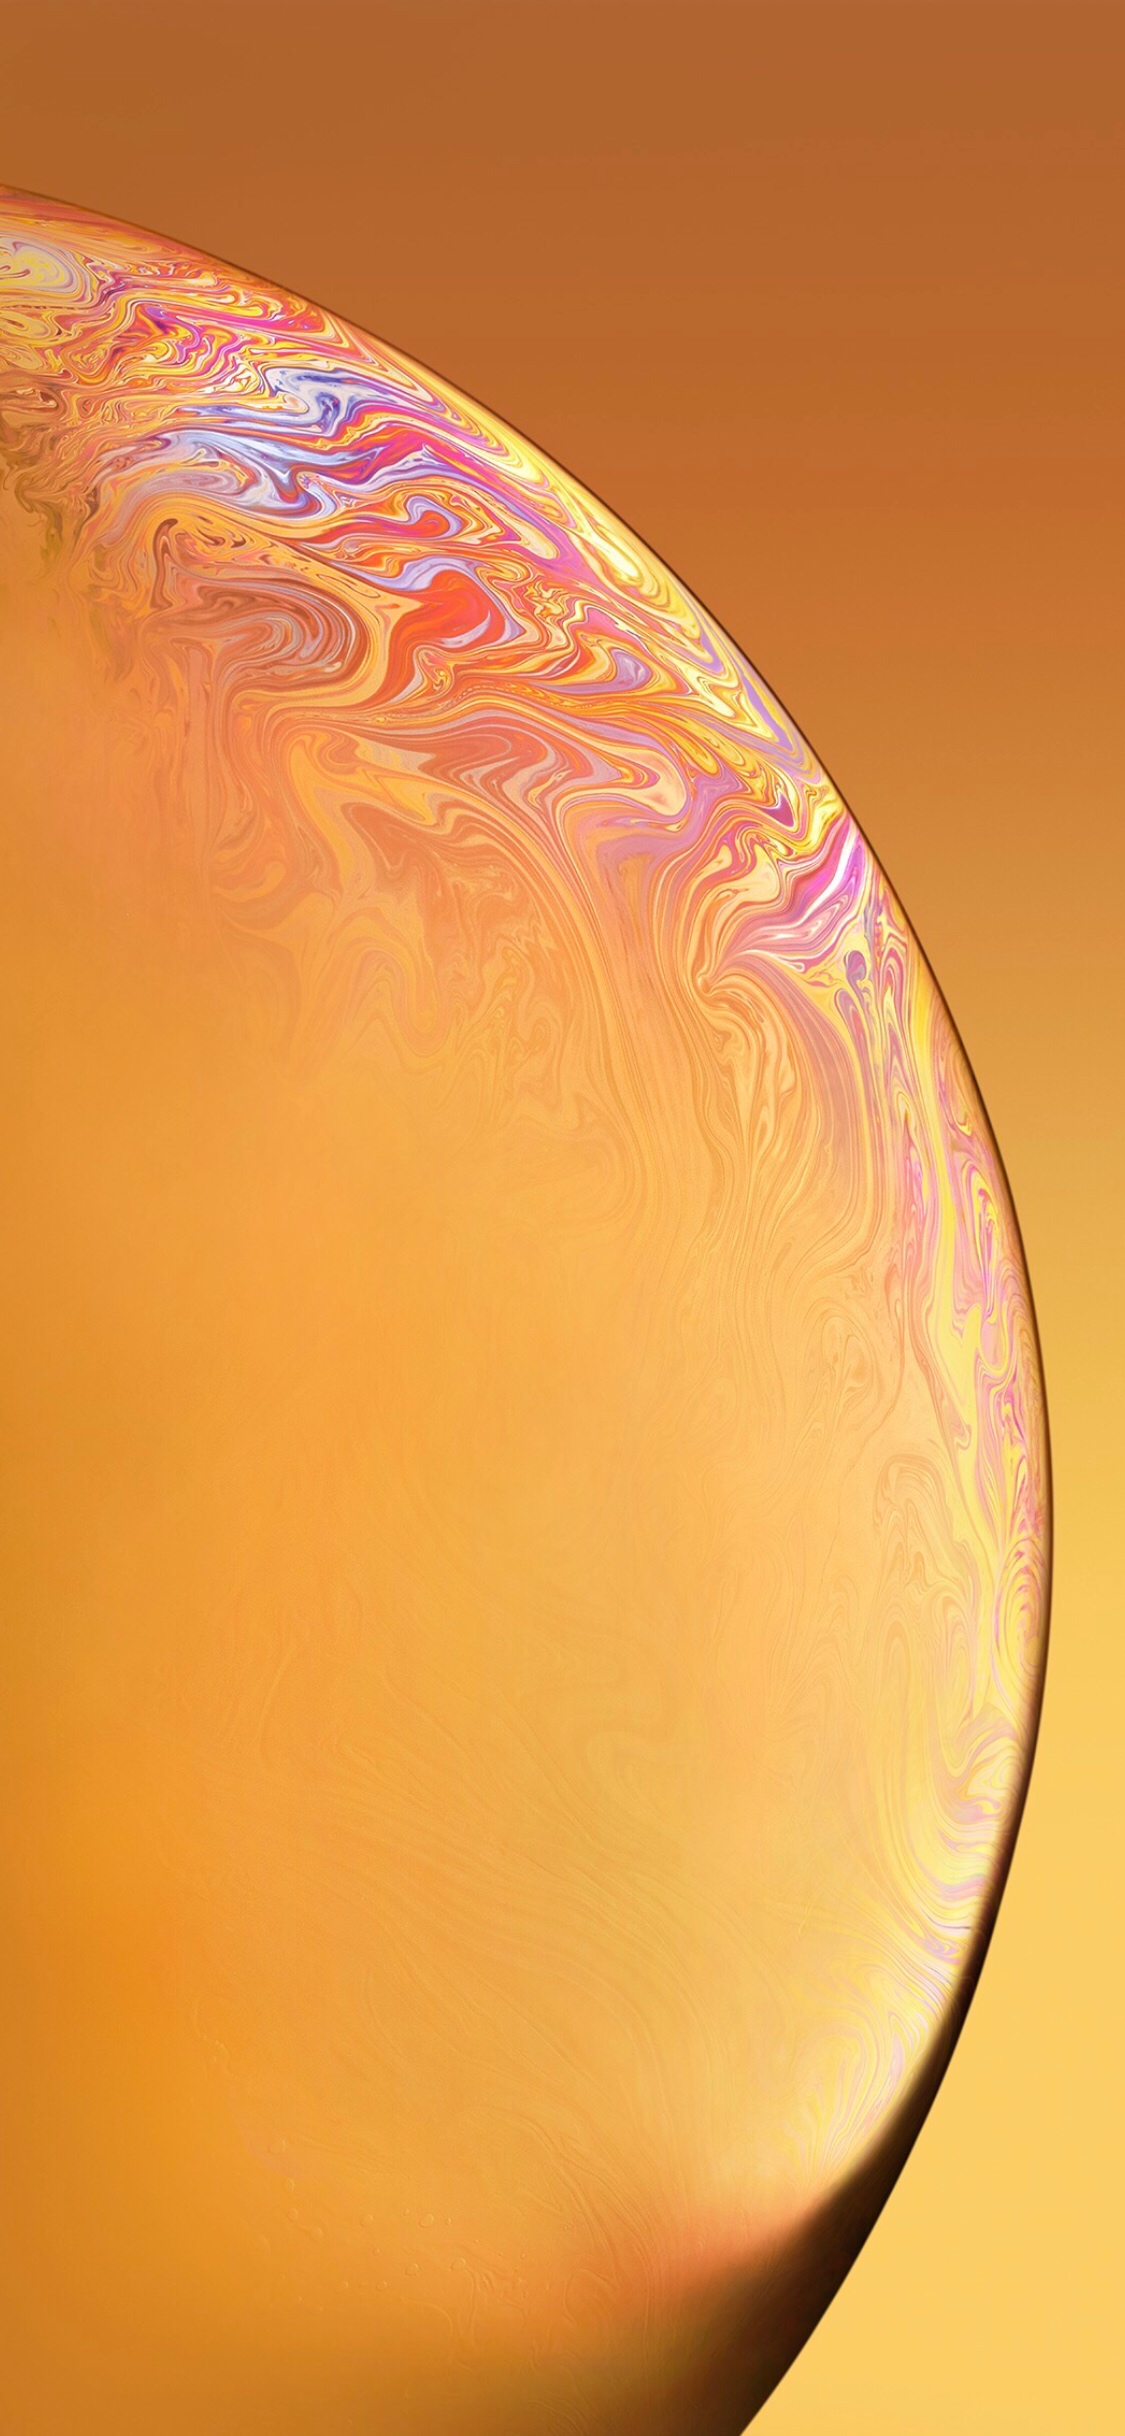 Wallpapers iPhone Xs iPhone Xs Max and iPhone Xr 1125x2436